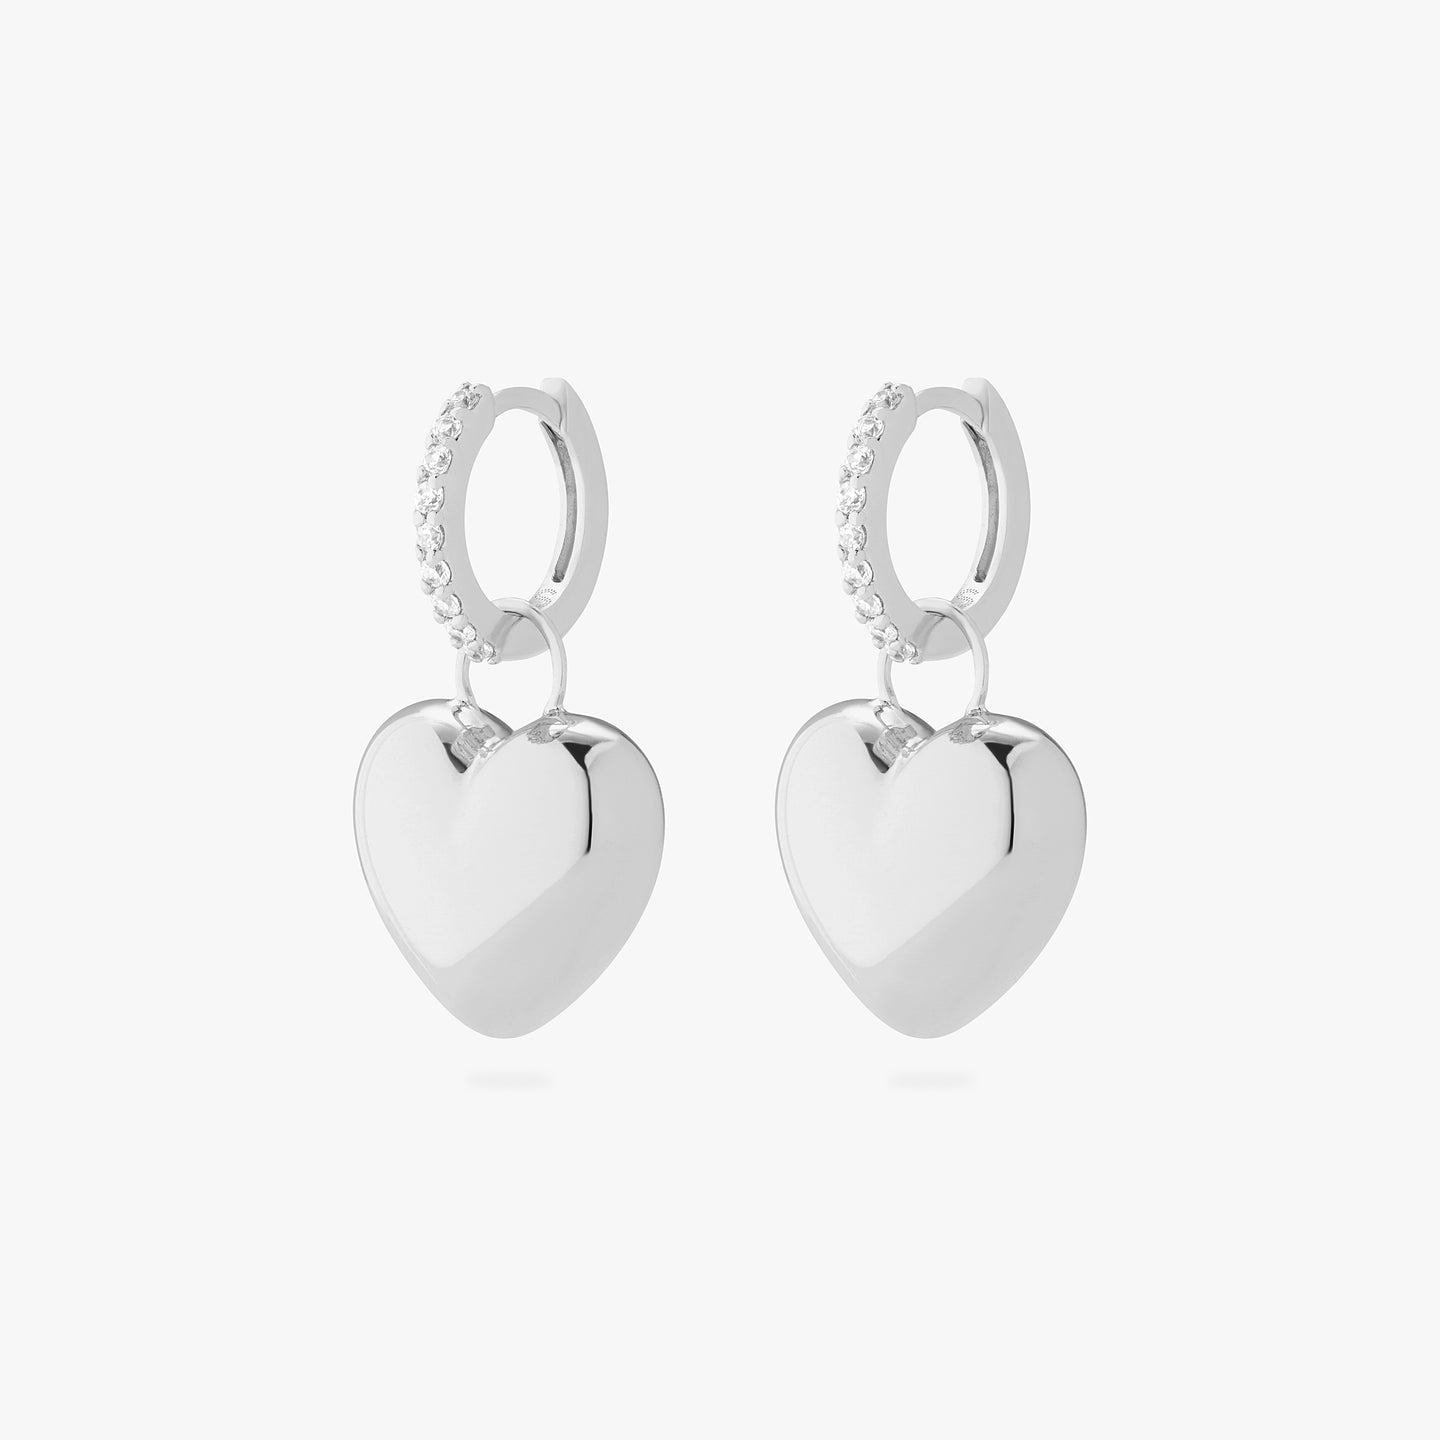 An image of a pair of silver/clear mini pave huggies with silver, puffy heart shaped charms. [pair] color:null|silver/clear